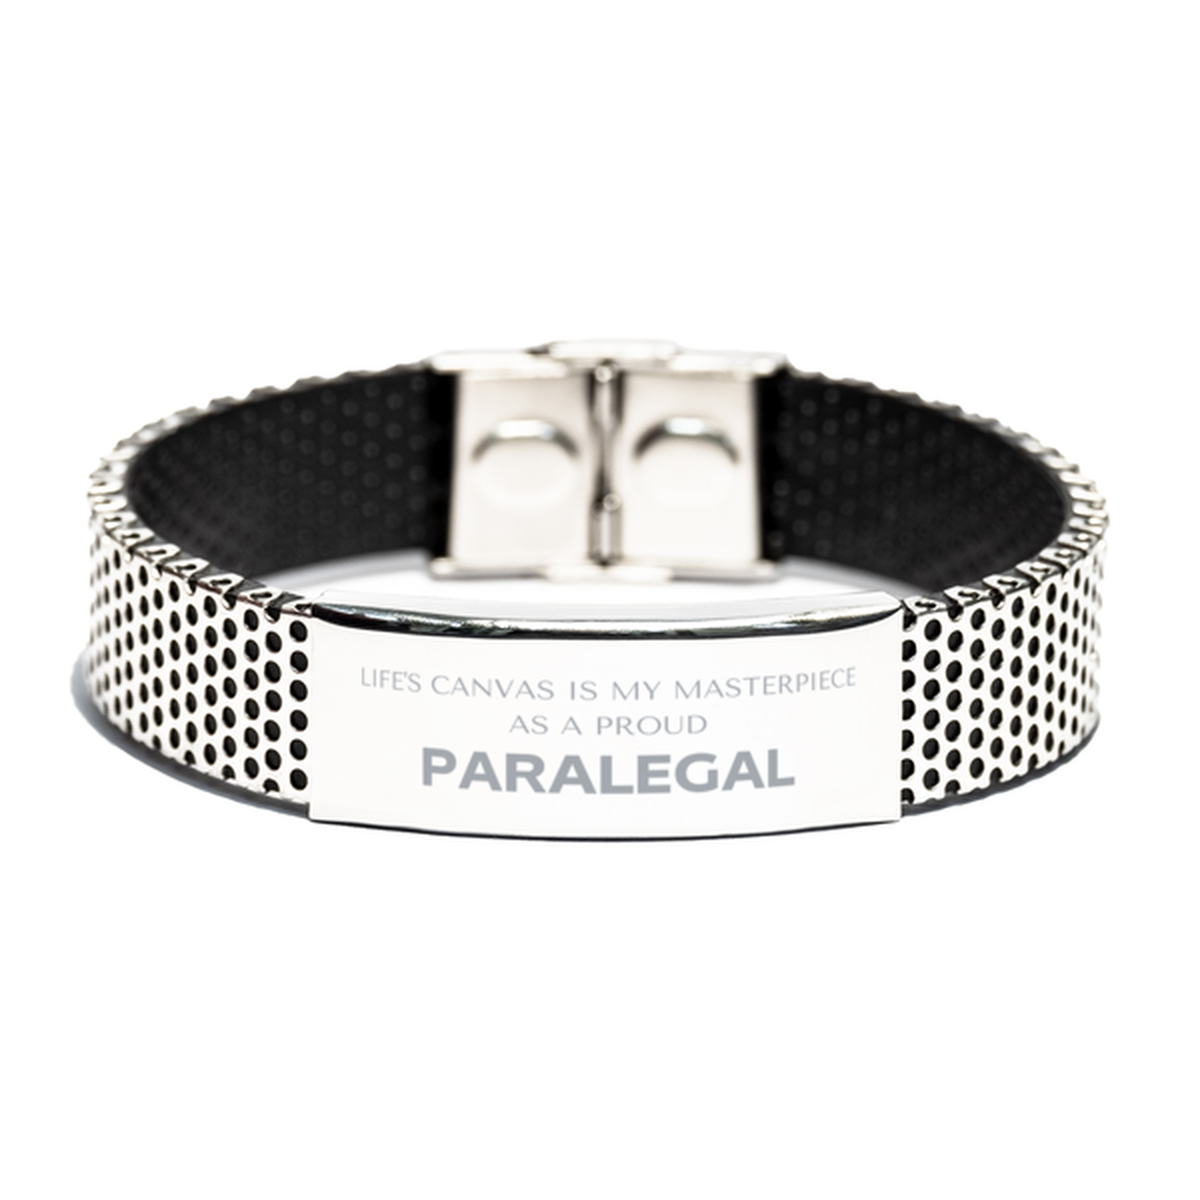 Proud Paralegal Gifts, Life's canvas is my masterpiece, Epic Birthday Christmas Unique Stainless Steel Bracelet For Paralegal, Coworkers, Men, Women, Friends